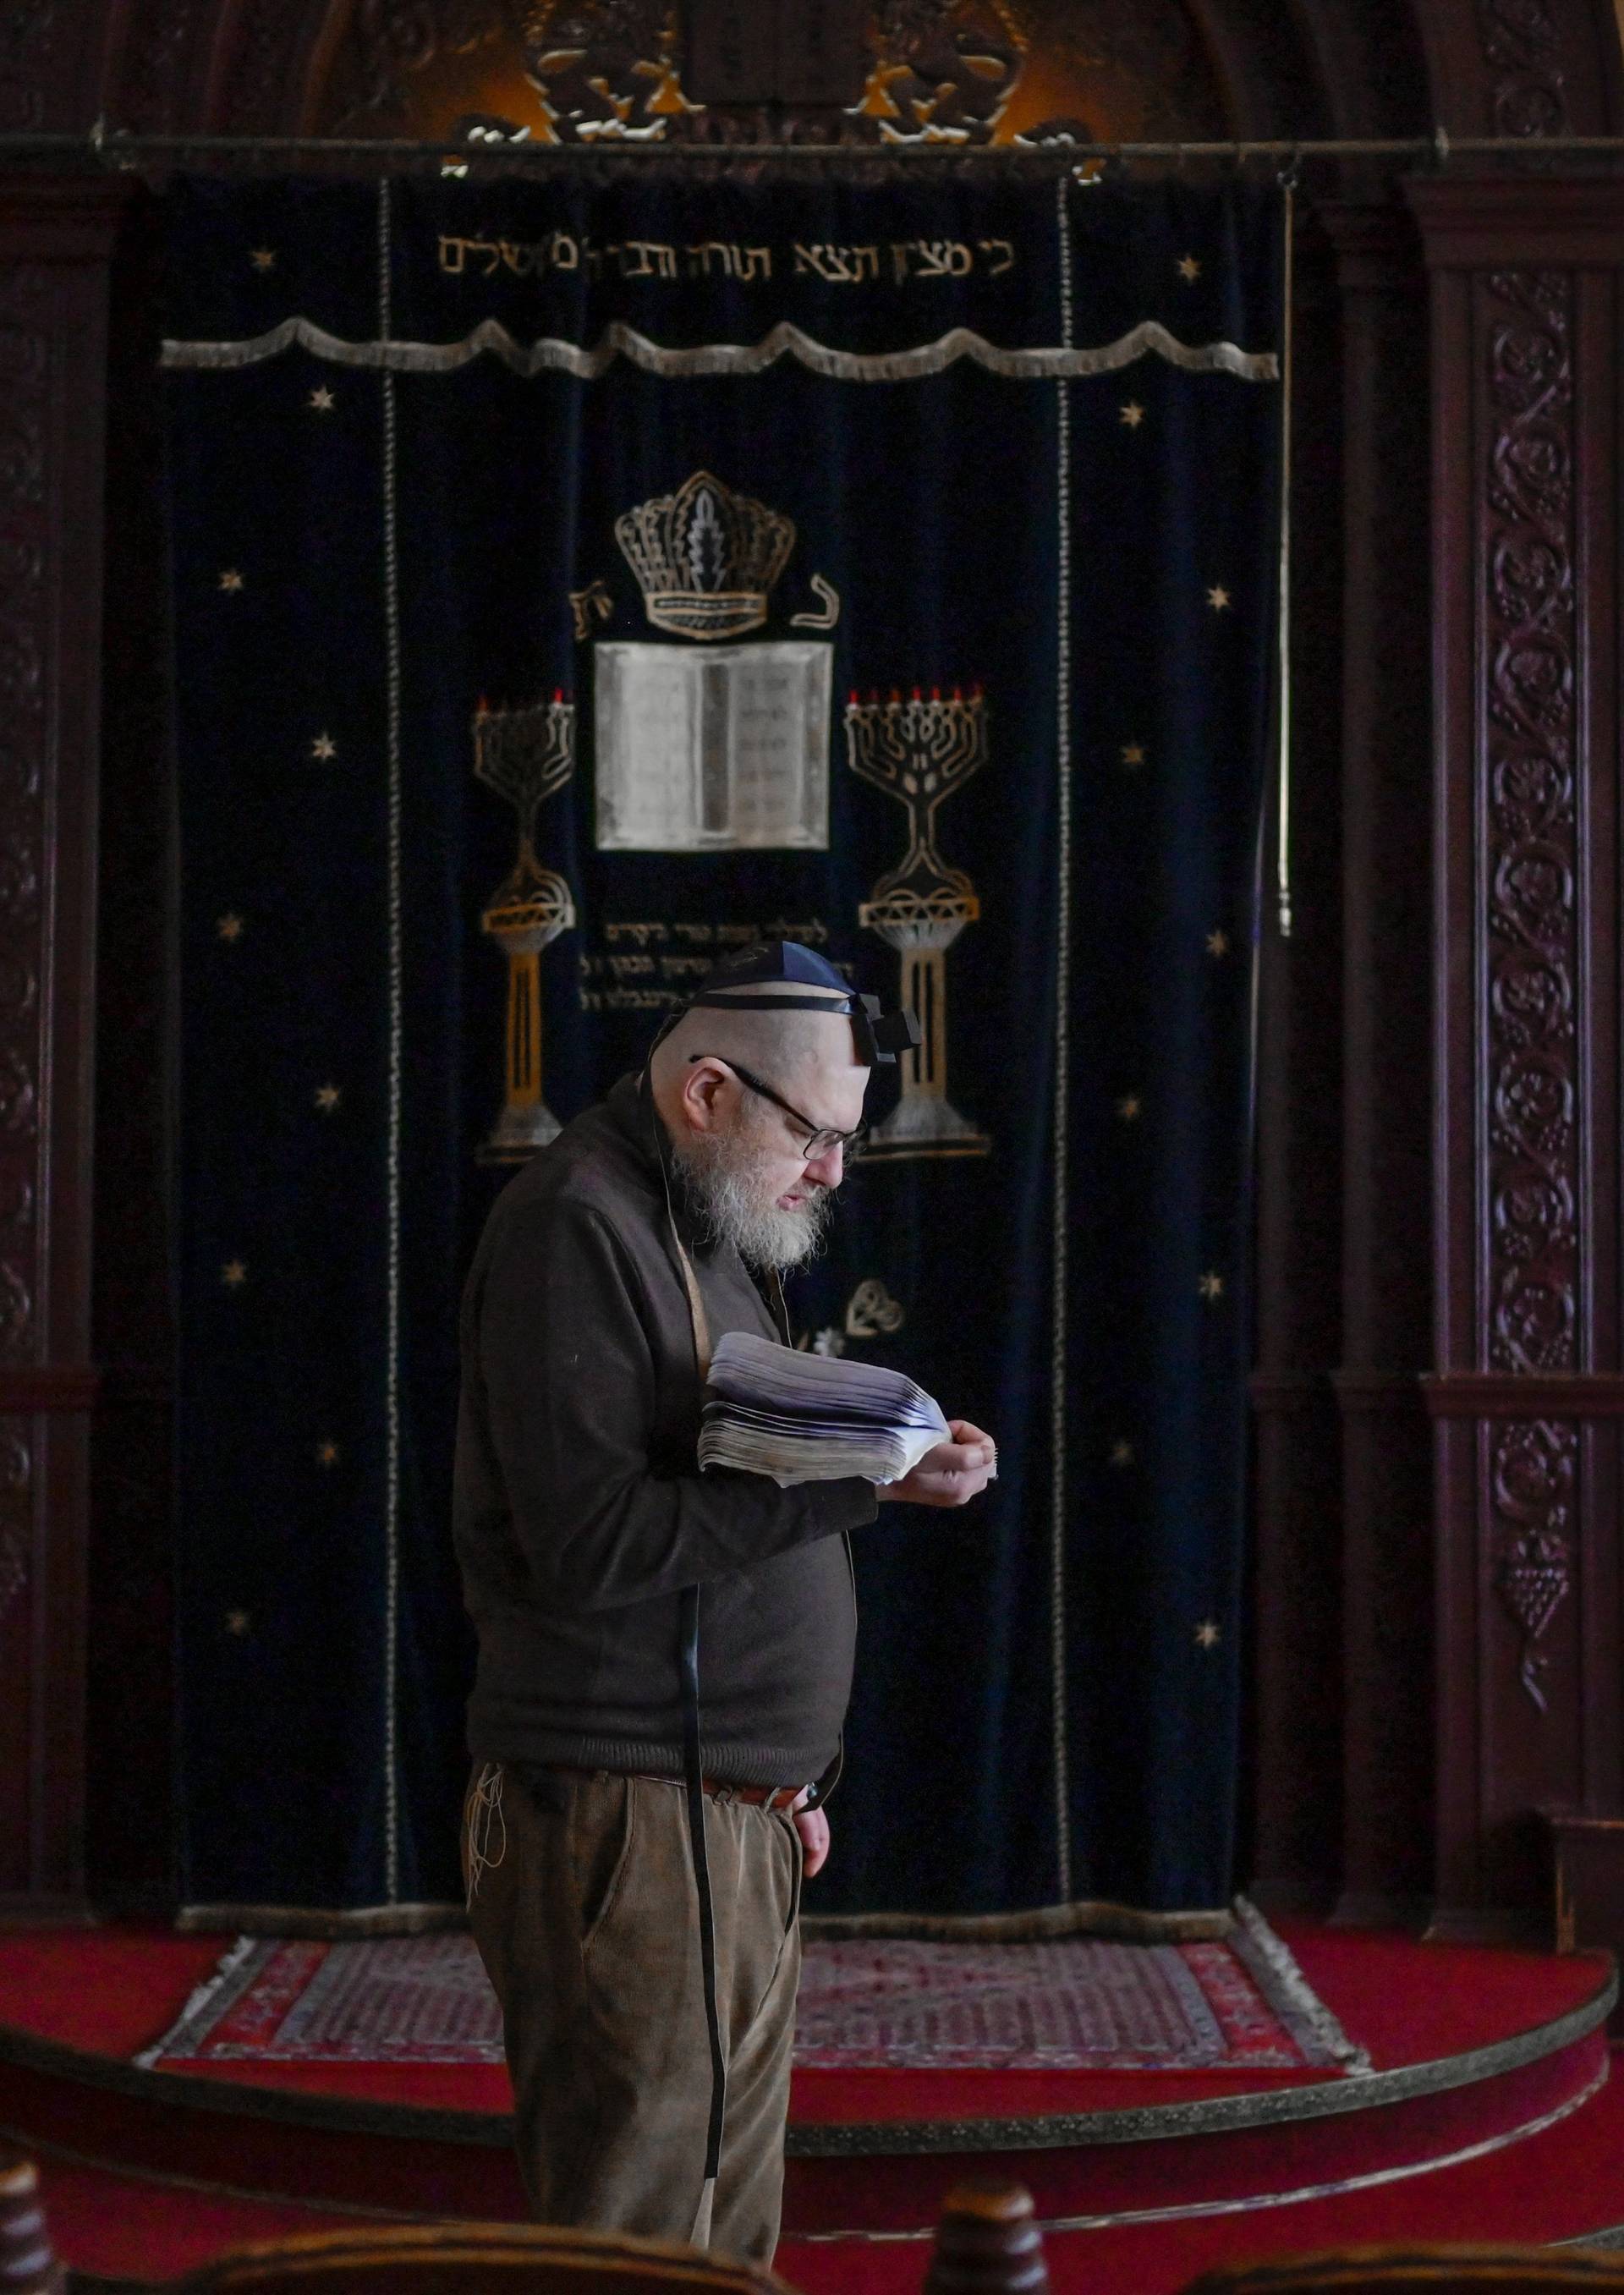 The Chabad Synagogue in Odessa, Ukraine, on March 9, 2022